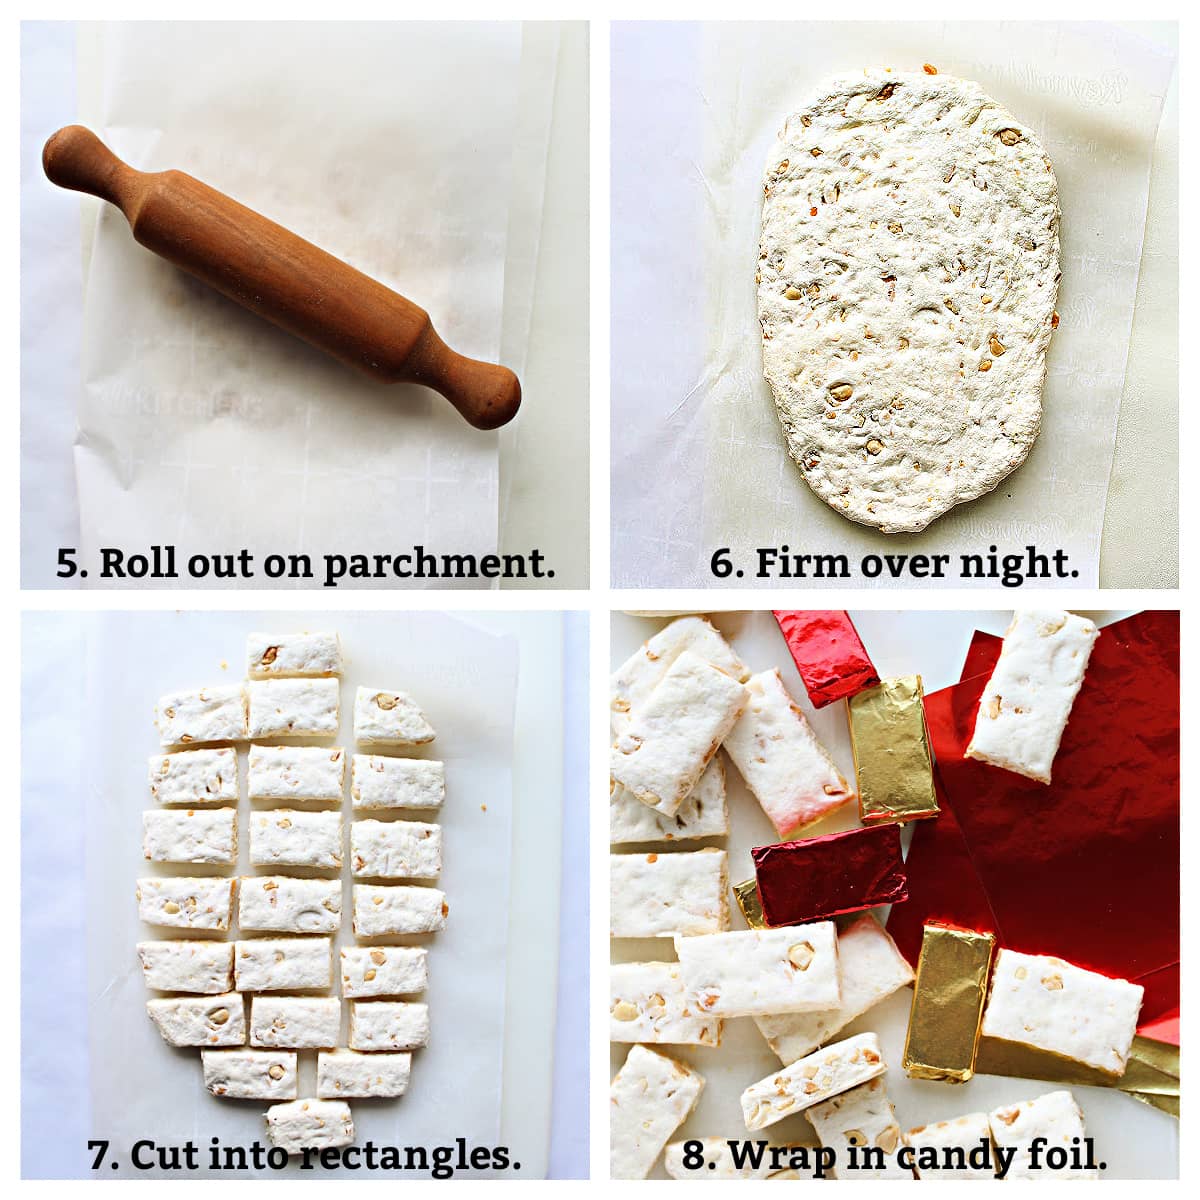 Step by step image collage: roll out between parchment, firm overnight, cut into rectangles, wrap.